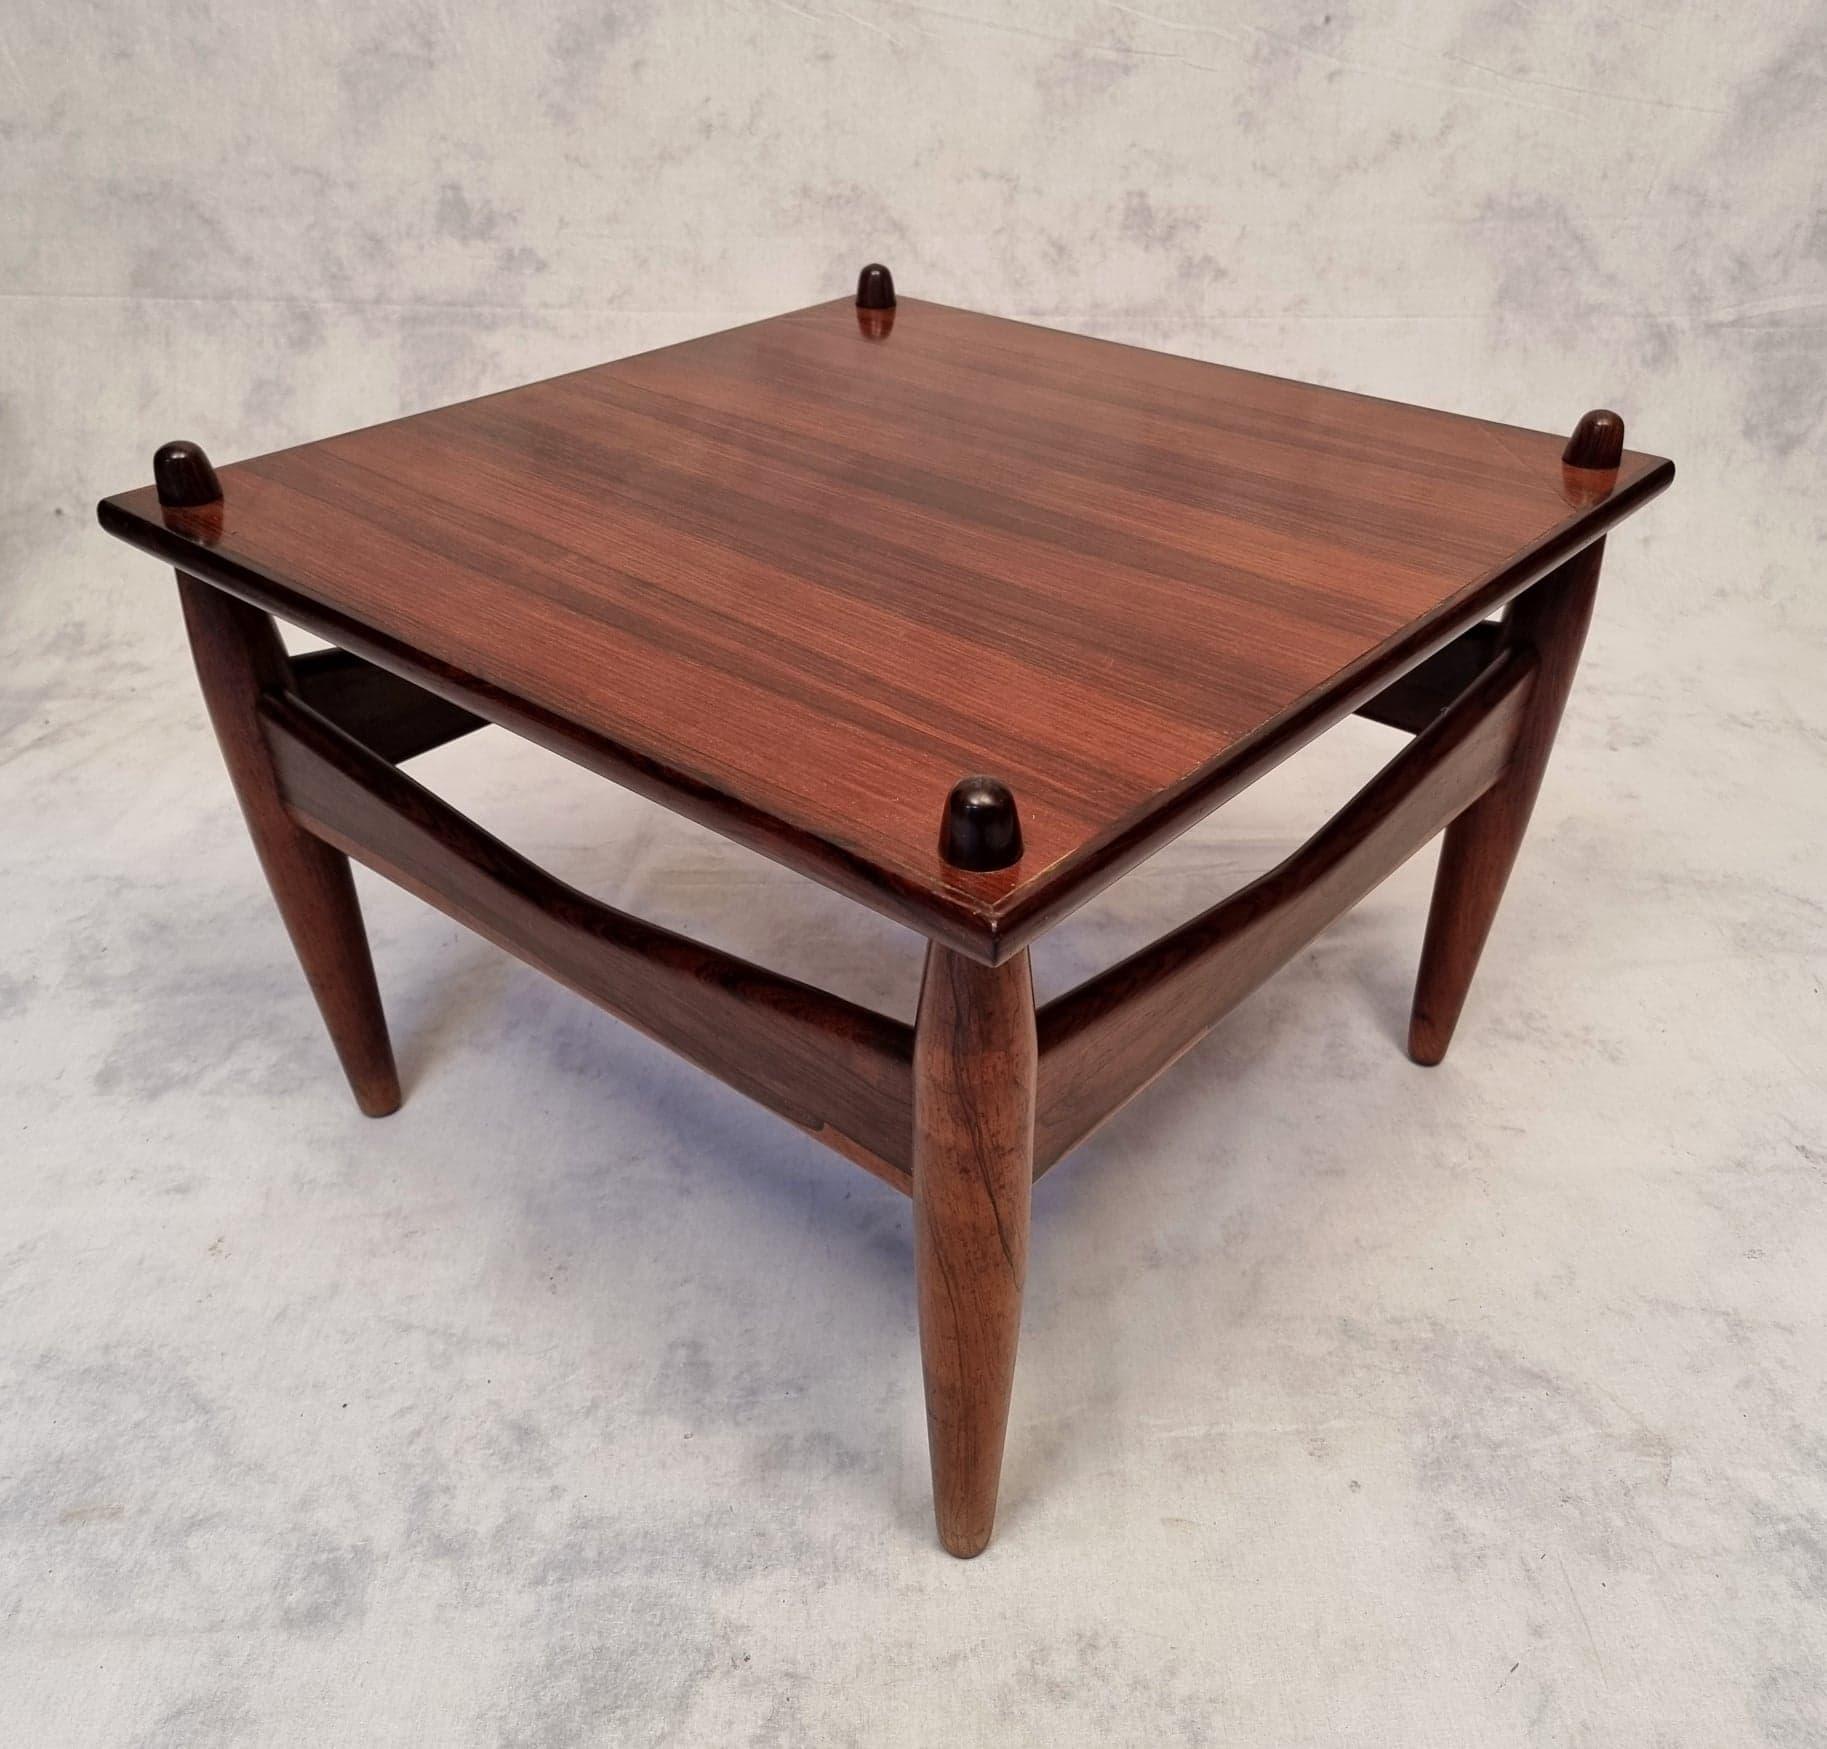 Pair Of Side Tables By Illum Wikkelsø – N°272, Rosewood, Ca 1950 For Sale 9